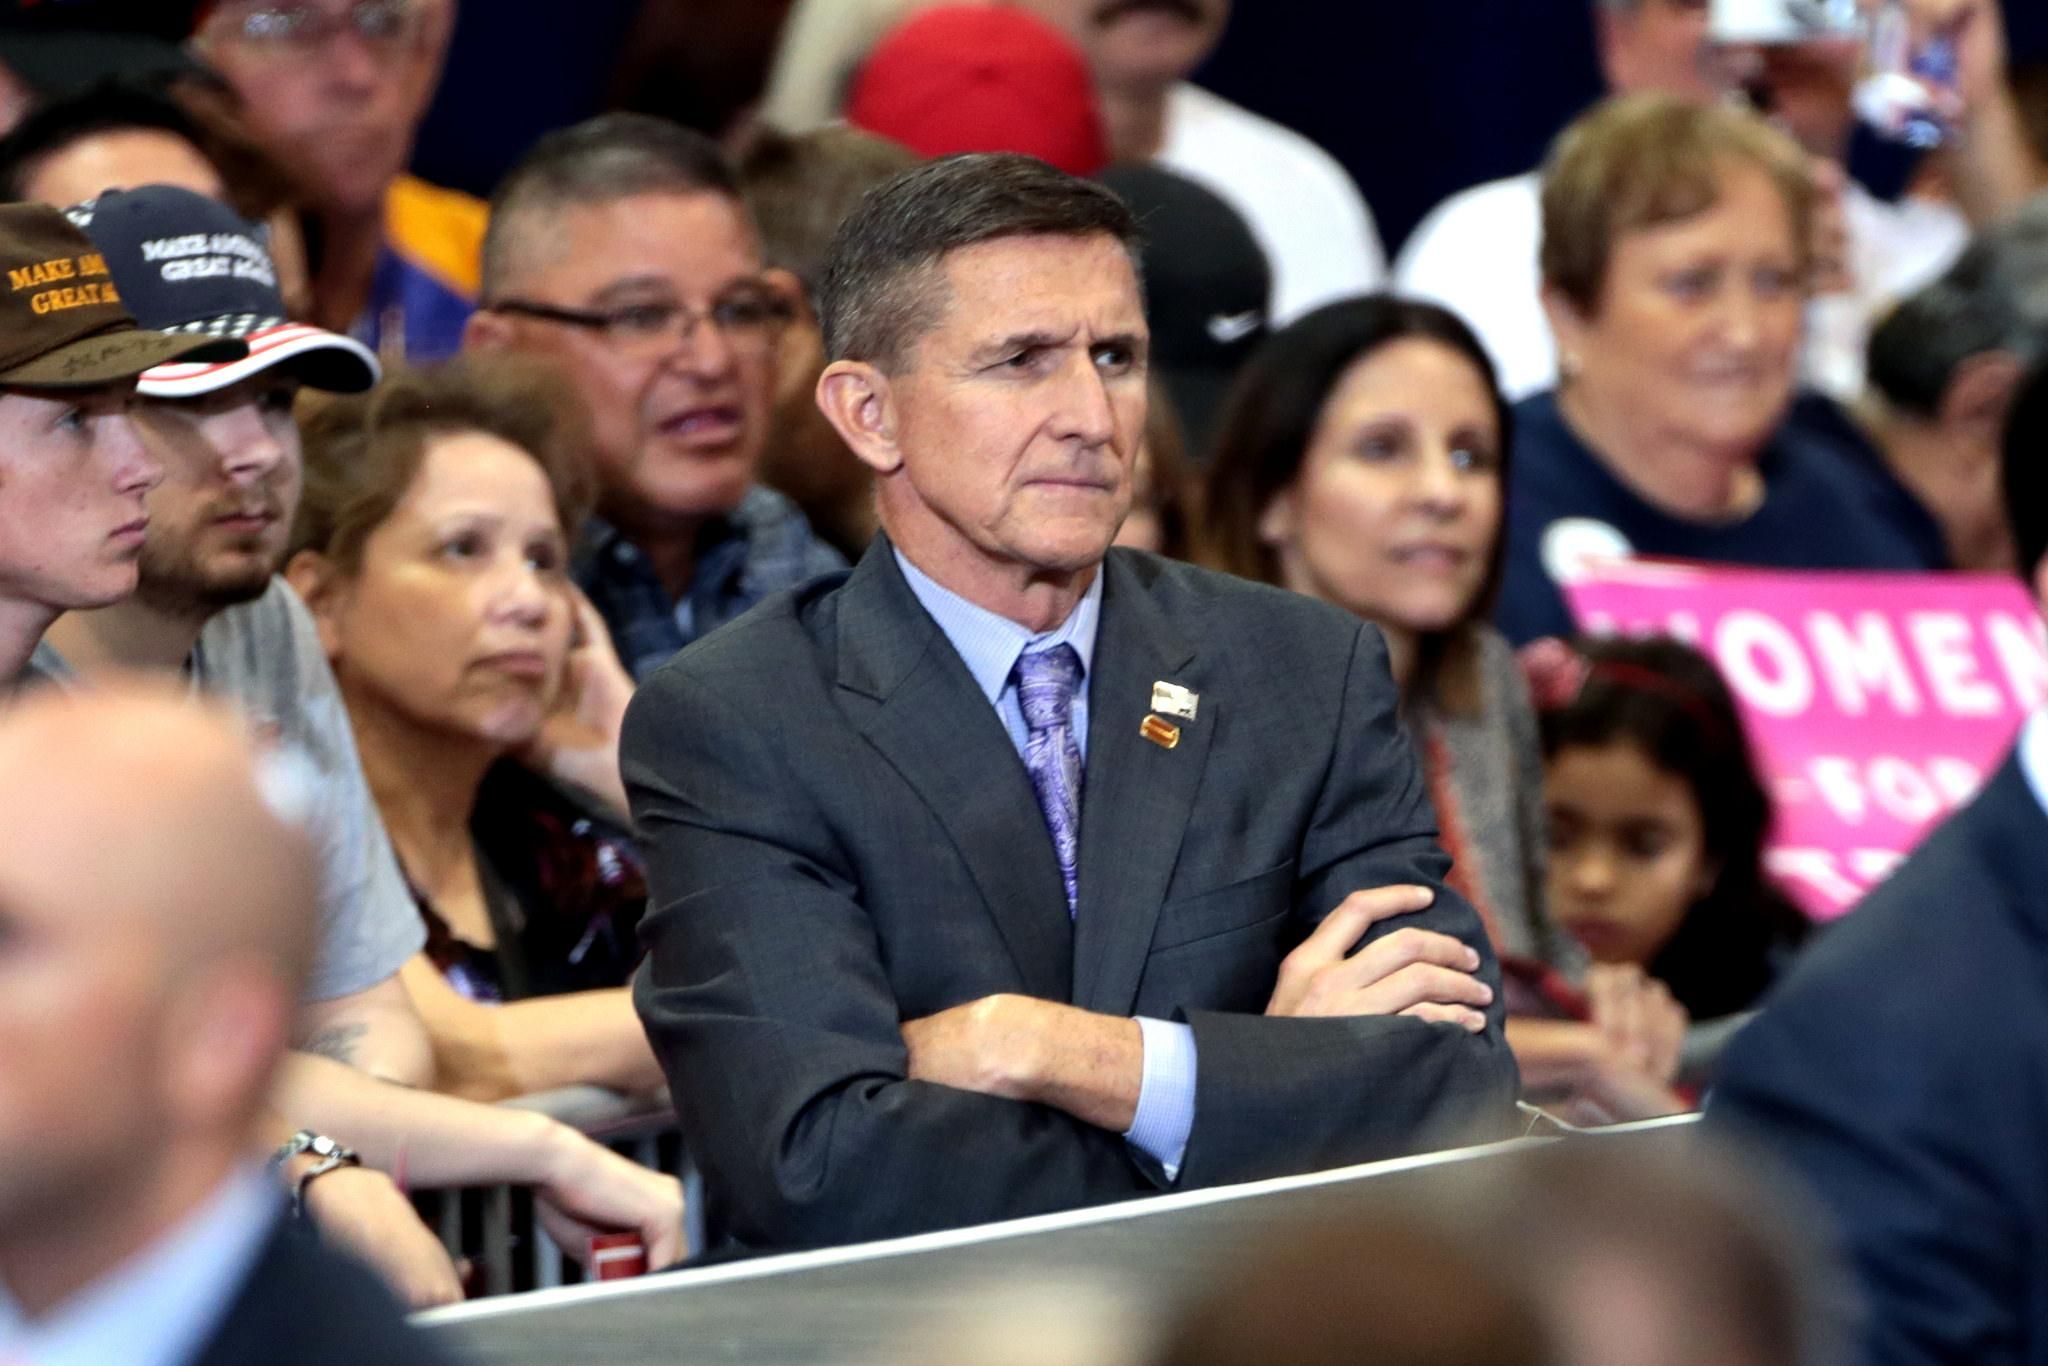 Flynn served in the Trump administration for only 24 days after being fired, following reports that he had been dishonest about his connections to Russia. 